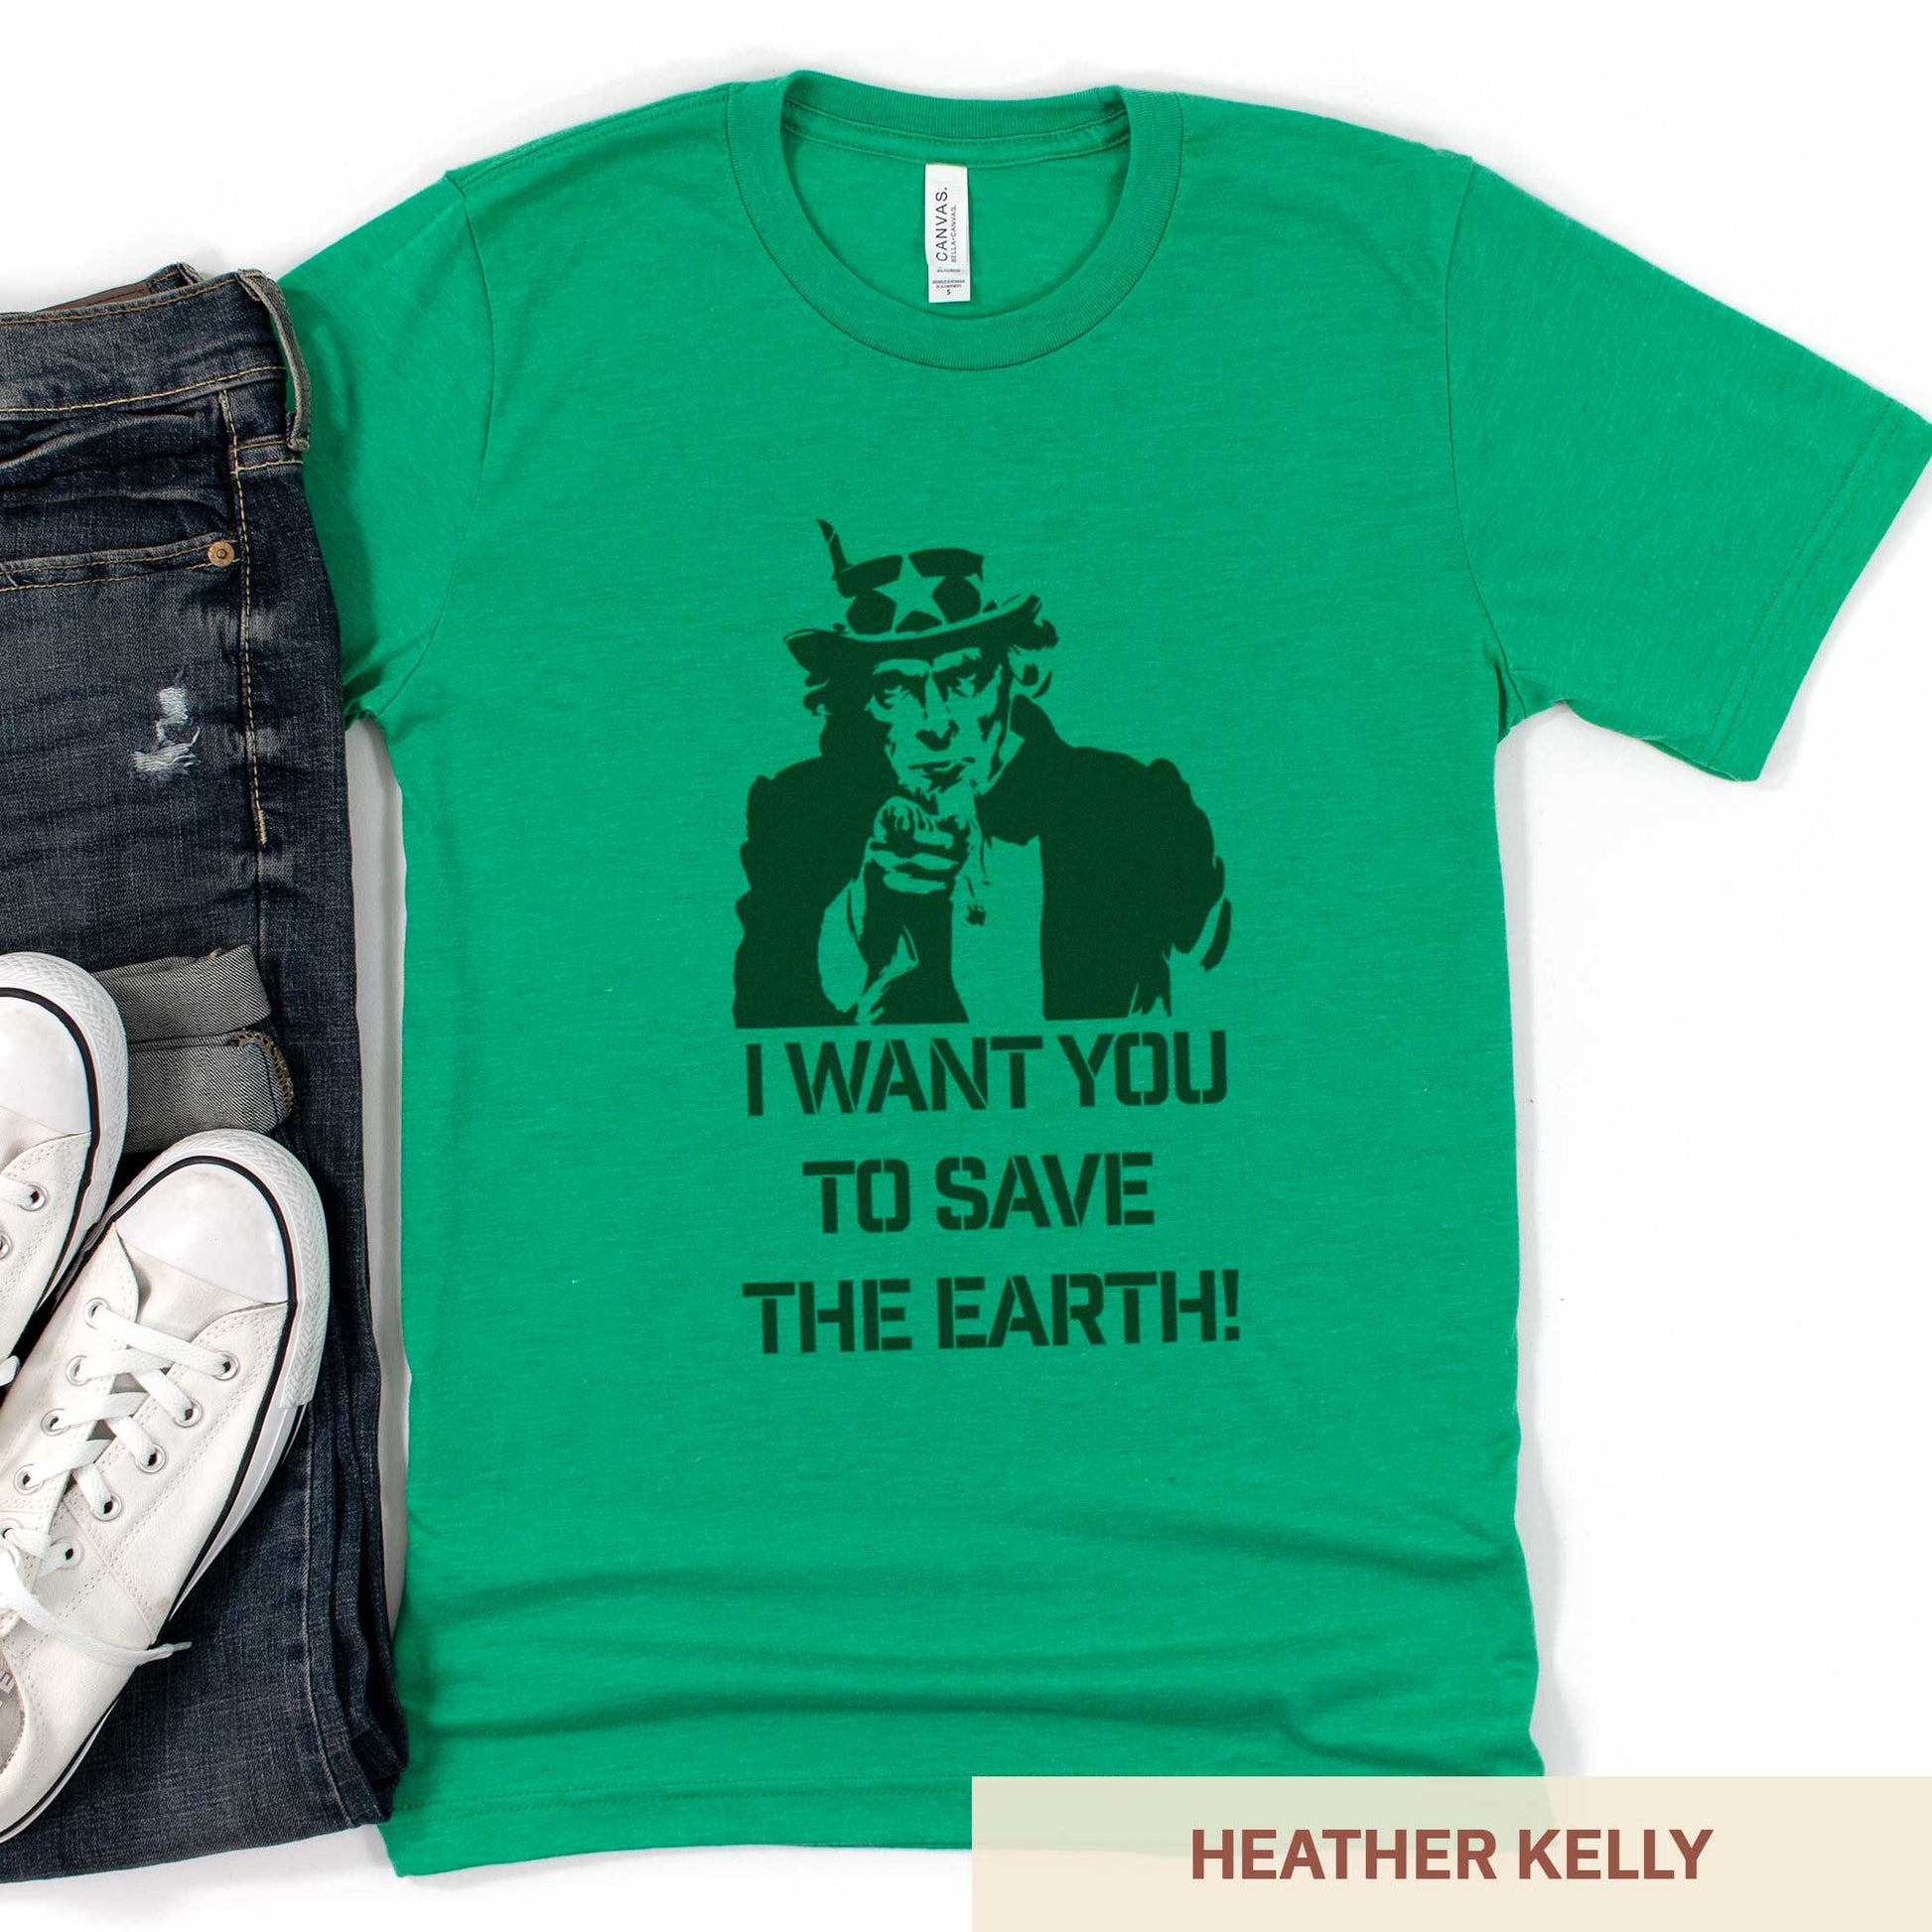 A heather kelly Bella Canvas t-shirt featuring Uncle Sam and the words I want you to save the Earth.